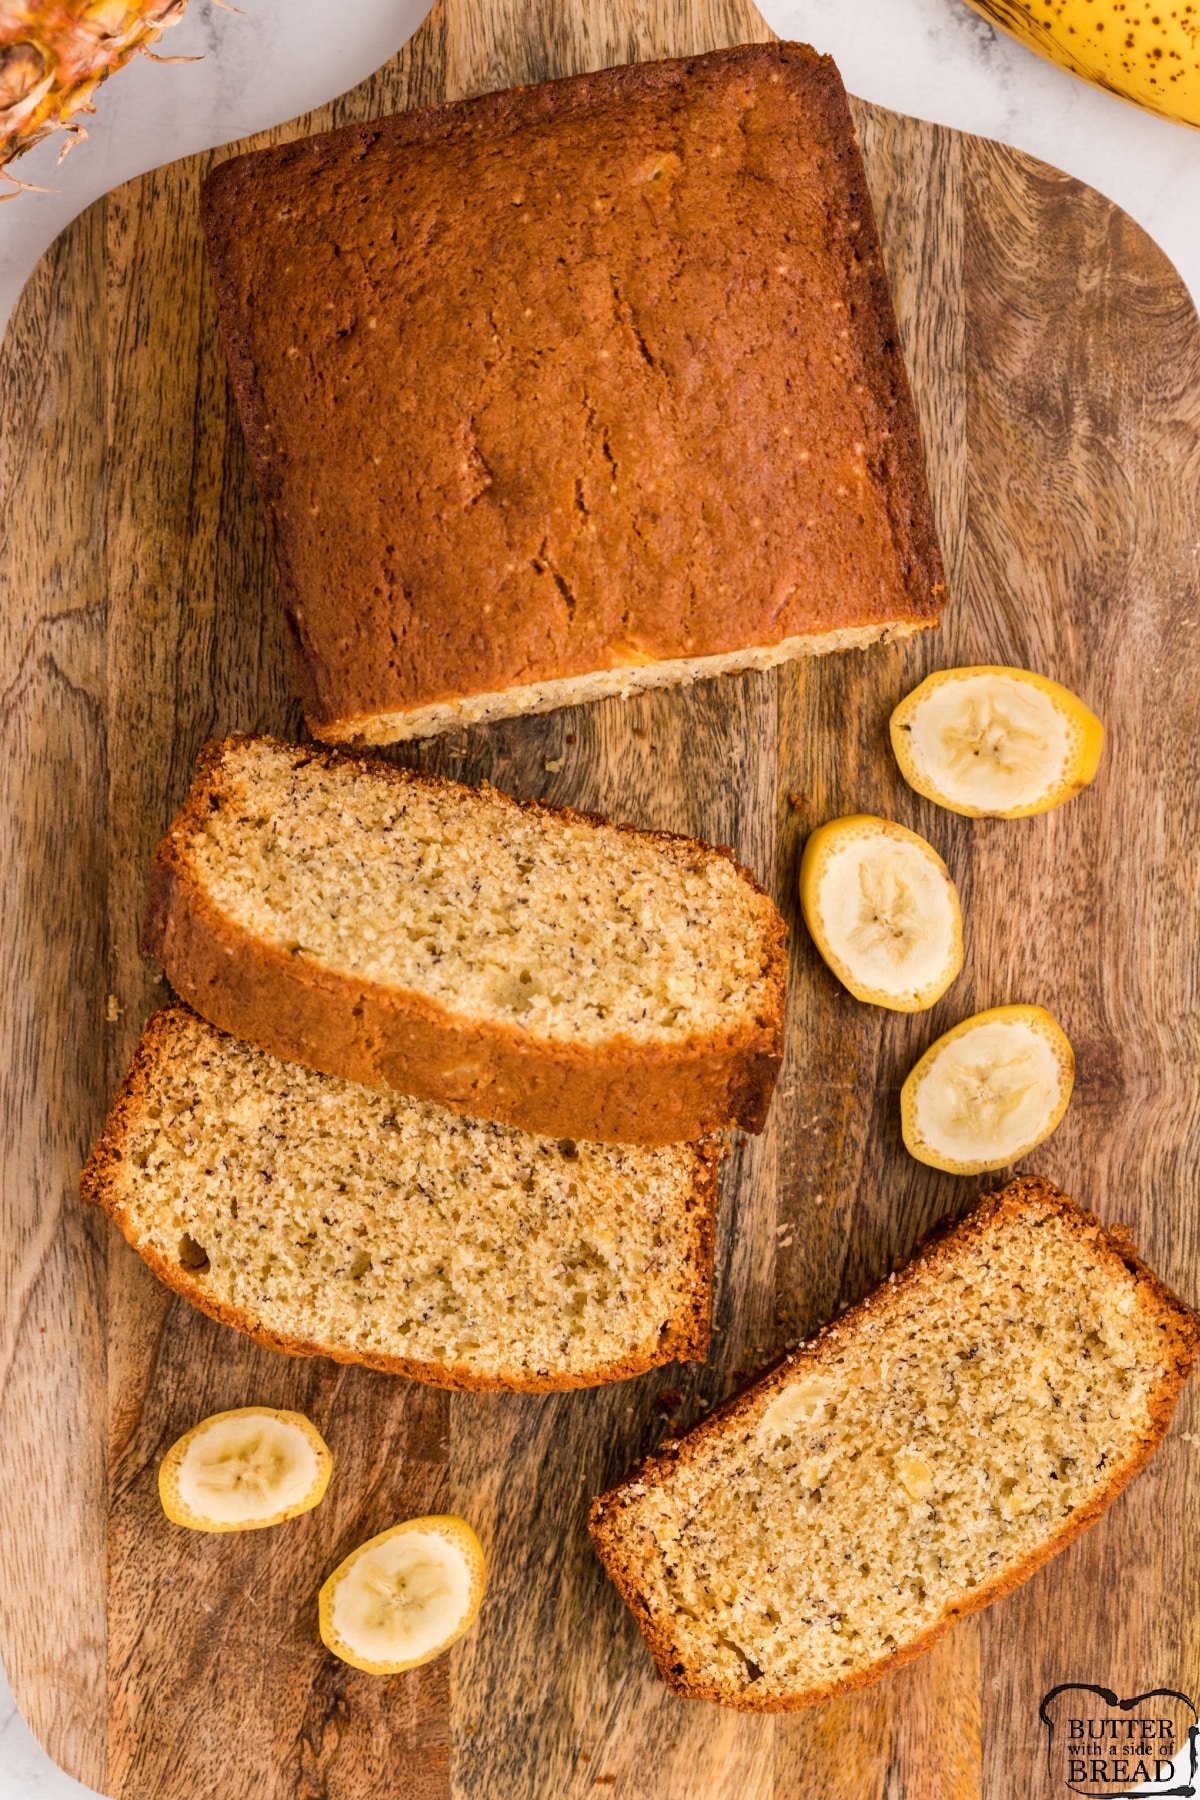 Banana bread recipe made with crushed pineapple